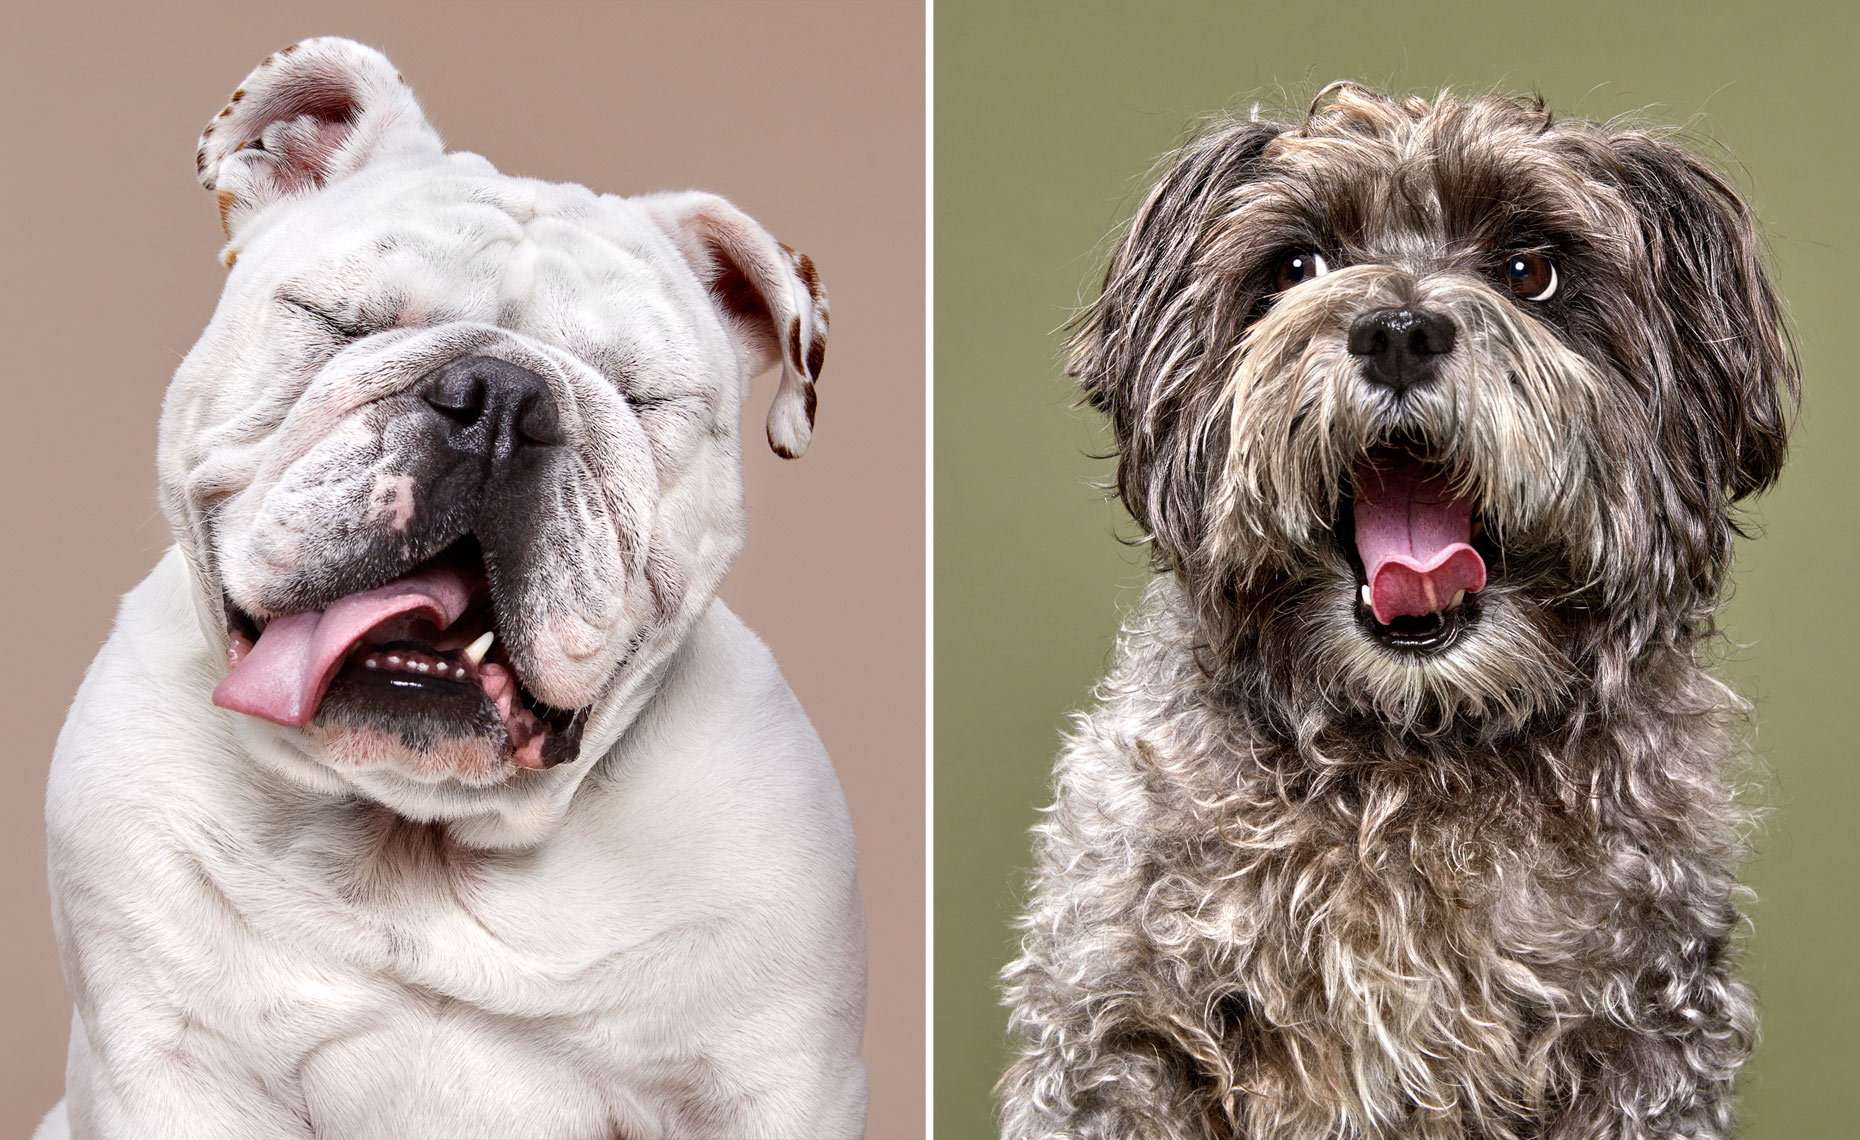 Bulldog laughing and terrier mix portraits